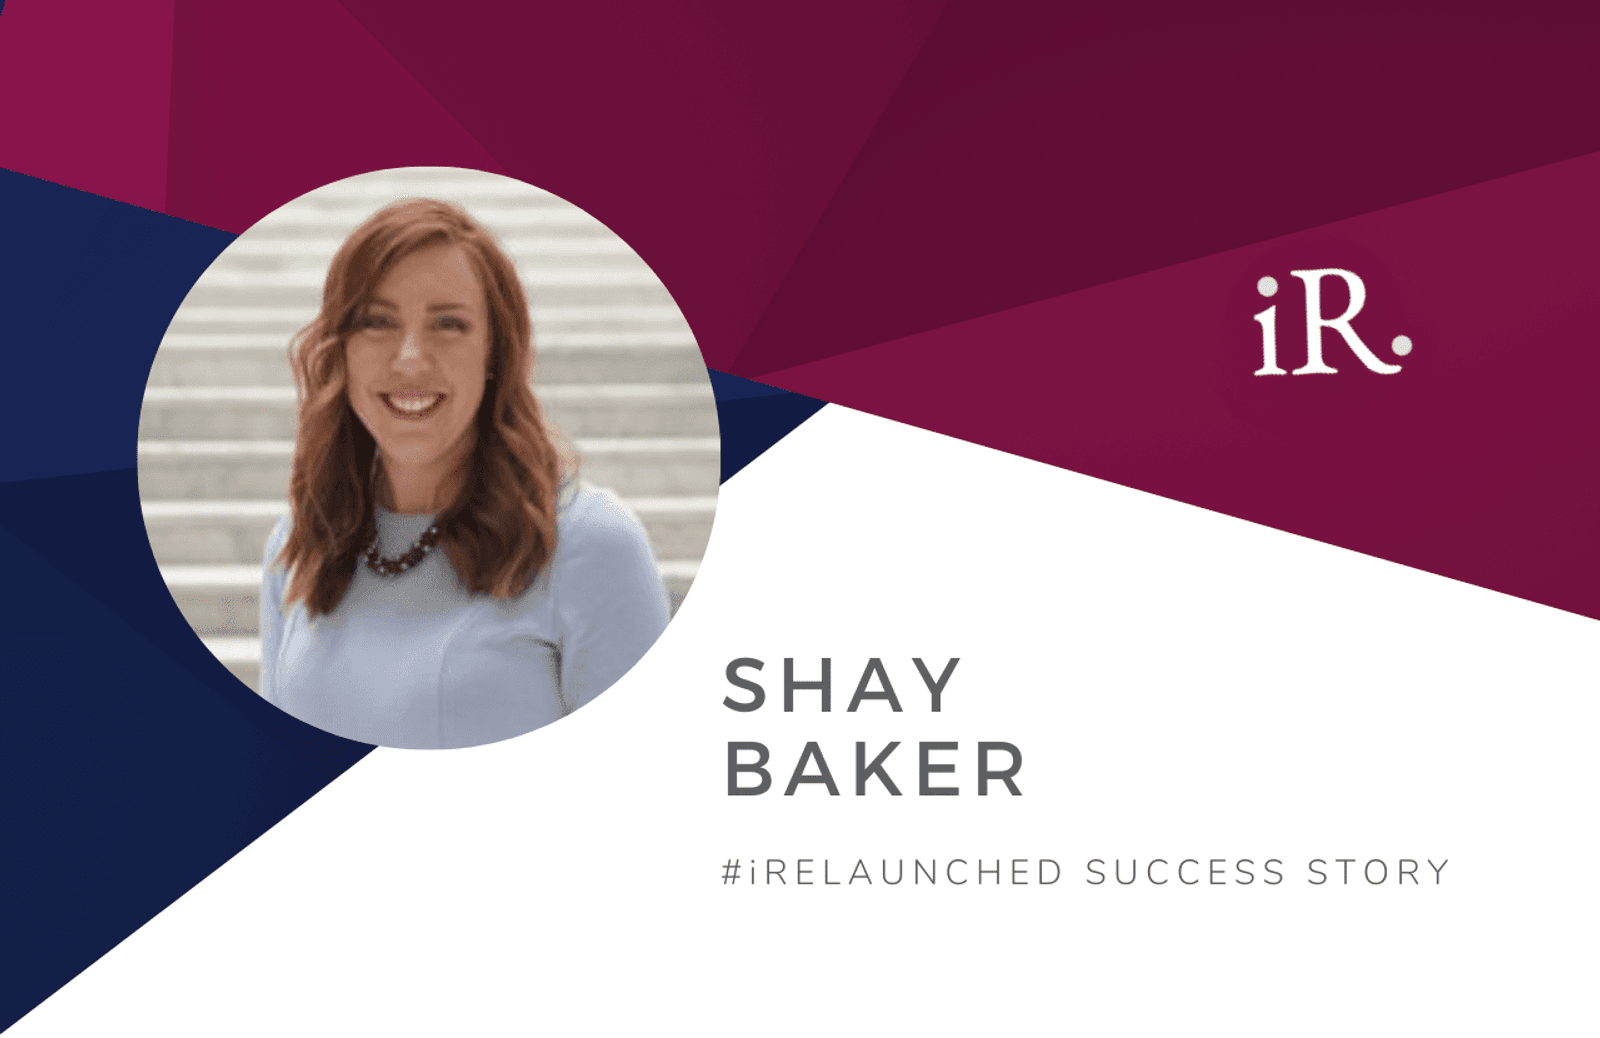 Shay Baker's headshot and the text #iRelaunched Success Story along with the iRelaunch logo.  A navy and maroon geometric textured background intersect behind Shay's headshot.